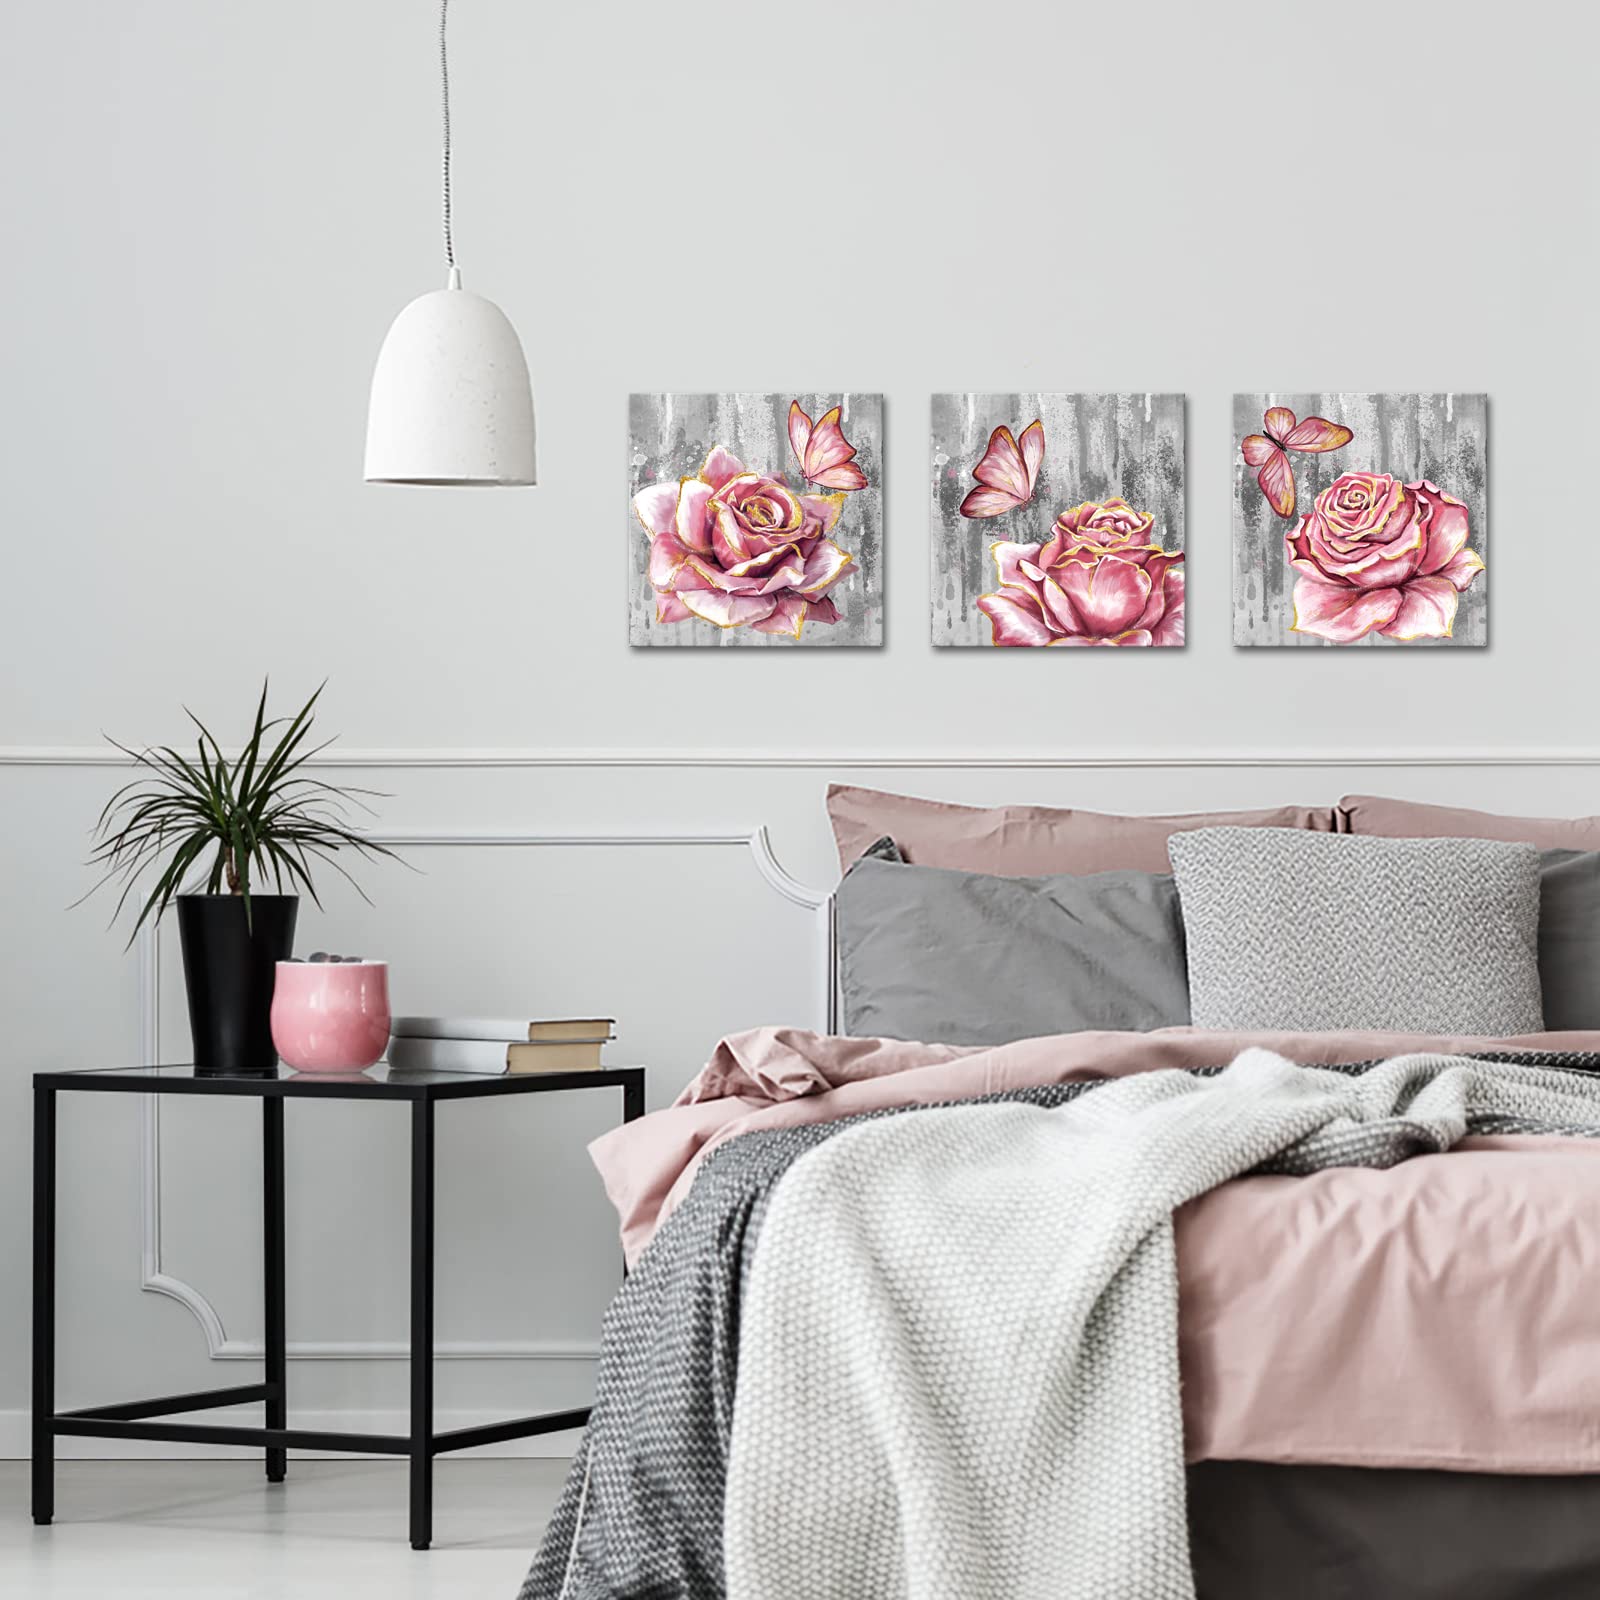 sechars 3 Panel Pink Rose Flower Wall Art Paintings Floral with Butterfly Prints on Grey Canvas Picture Wall Decoration Framed Trendy Gold and Pink Bathroom Bedroom Decor Artwork 12